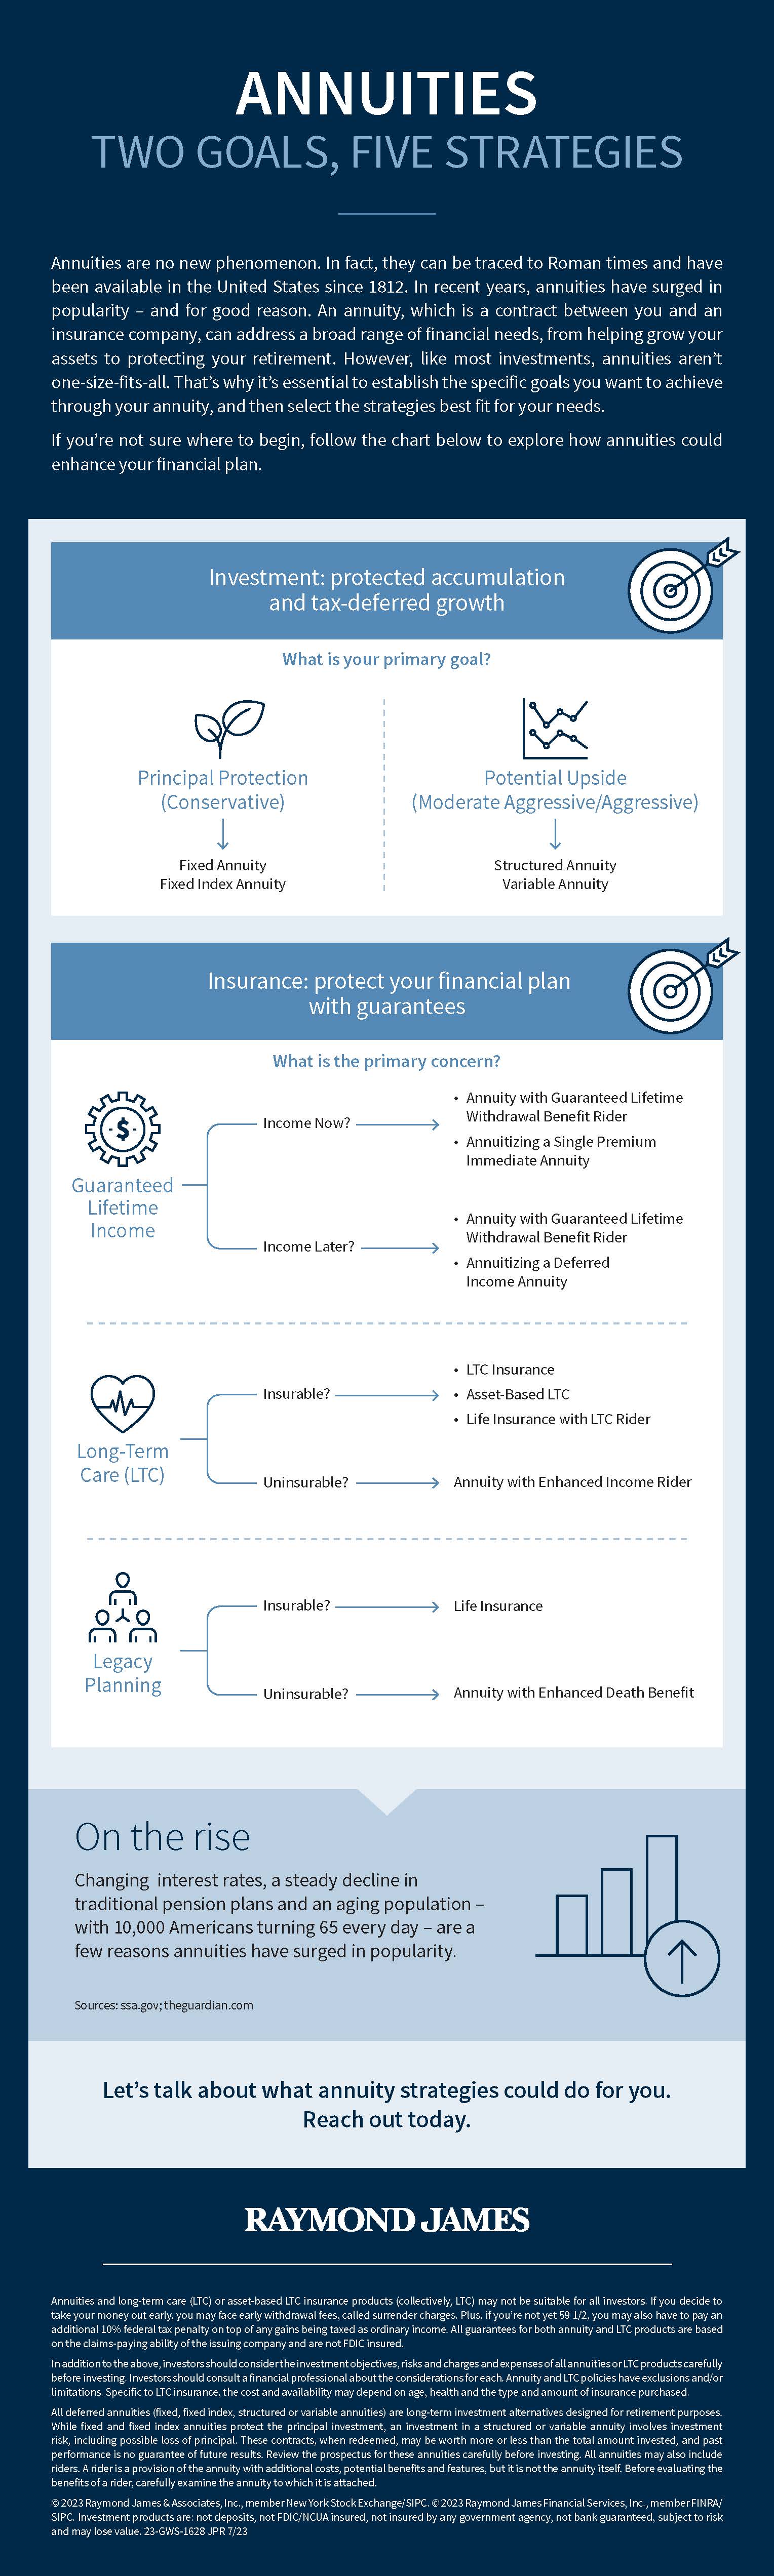 Annuity strategies infographic